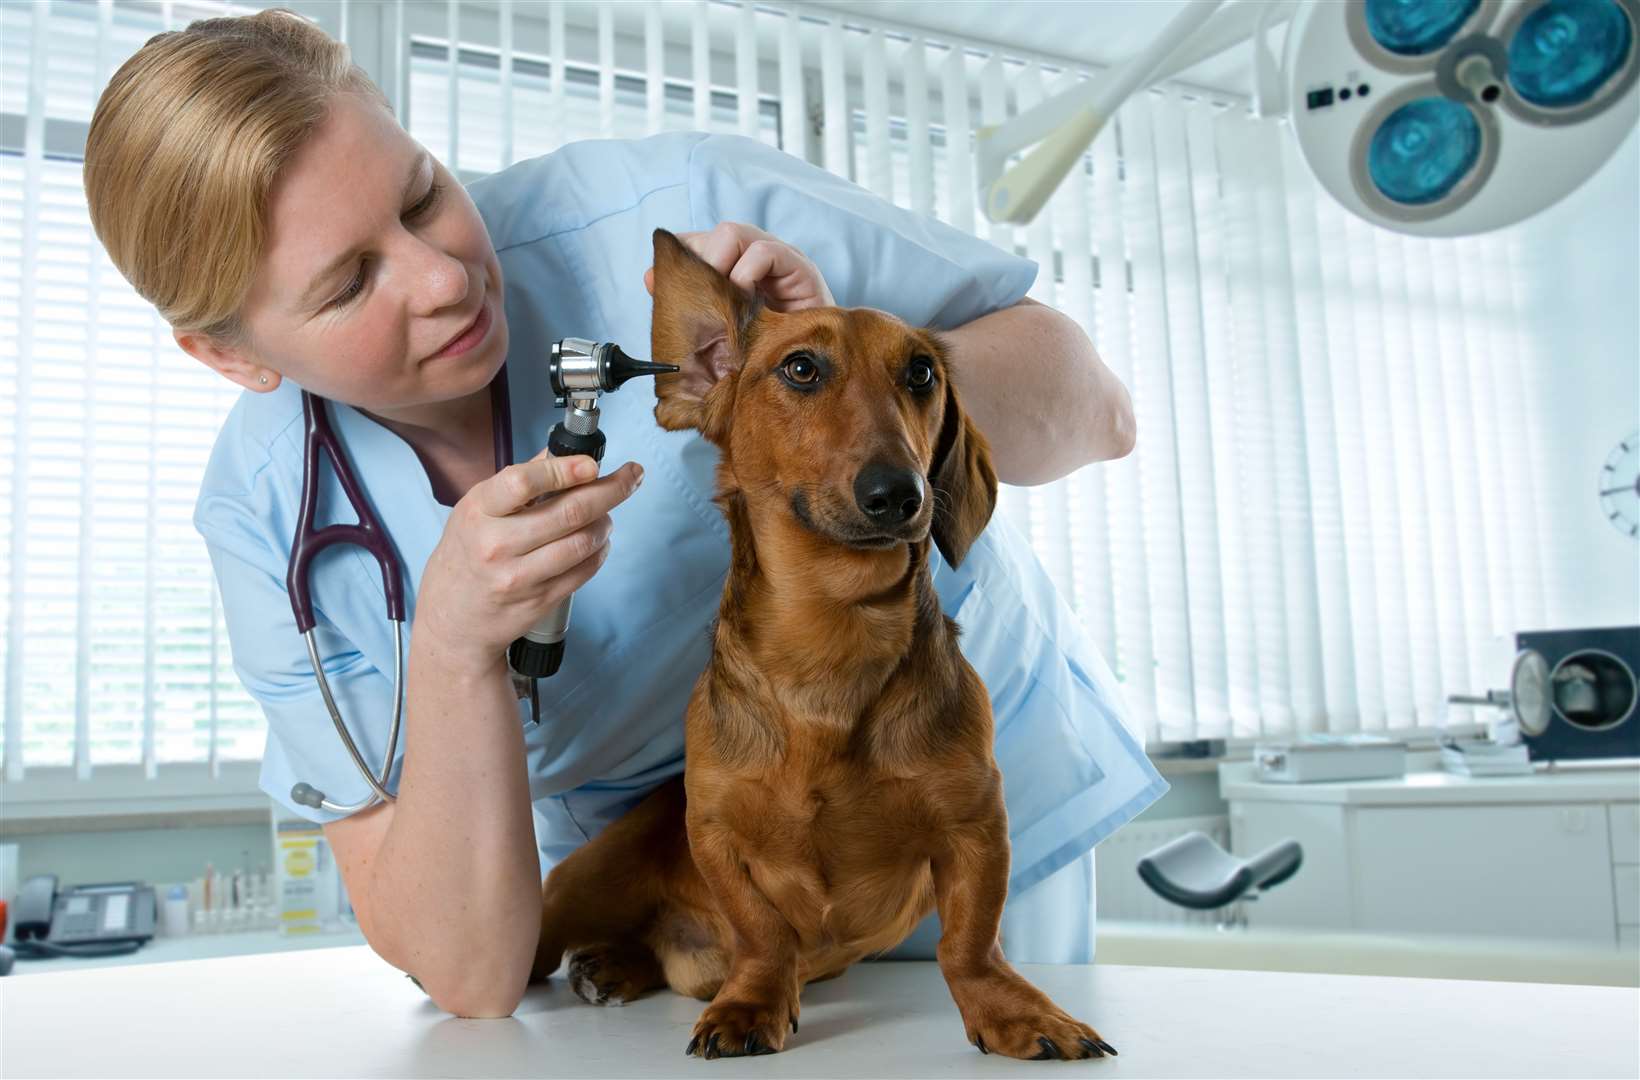 Do you have what it takes to be a veterinary nurse, helping animals and their owners?